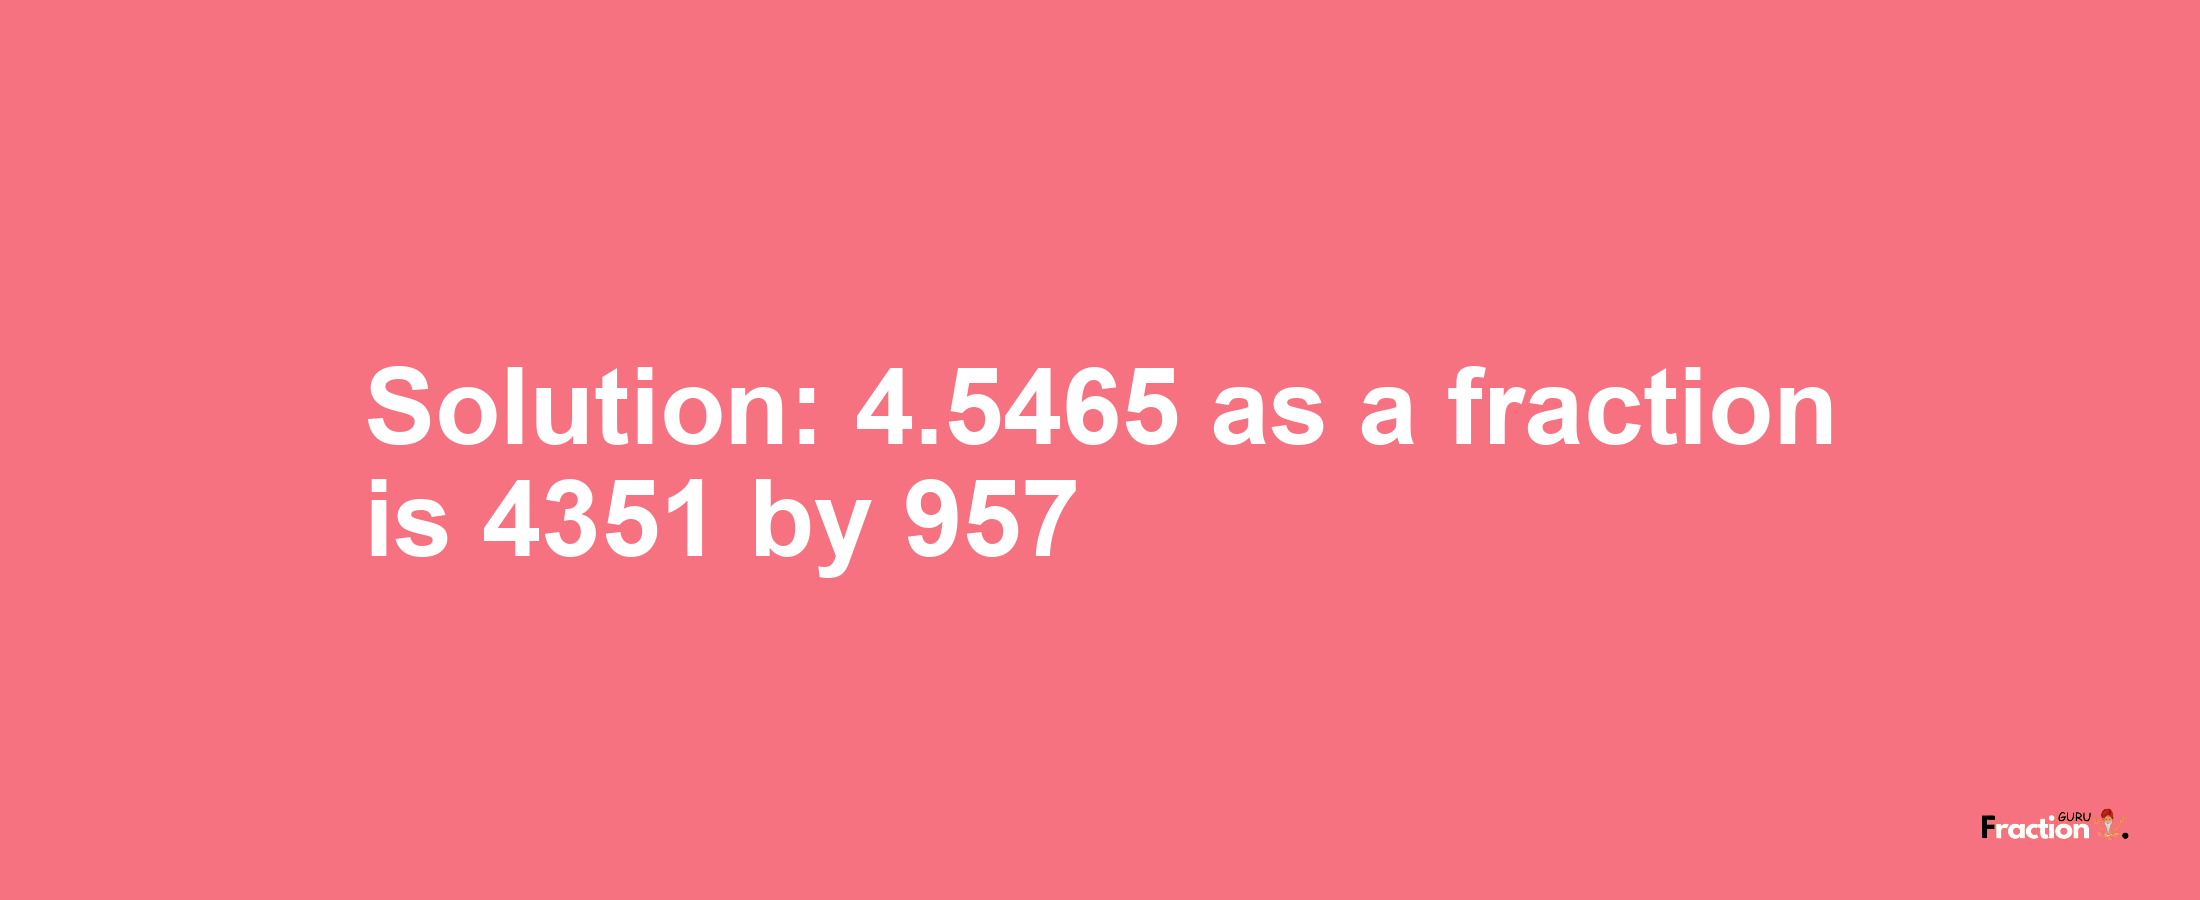 Solution:4.5465 as a fraction is 4351/957